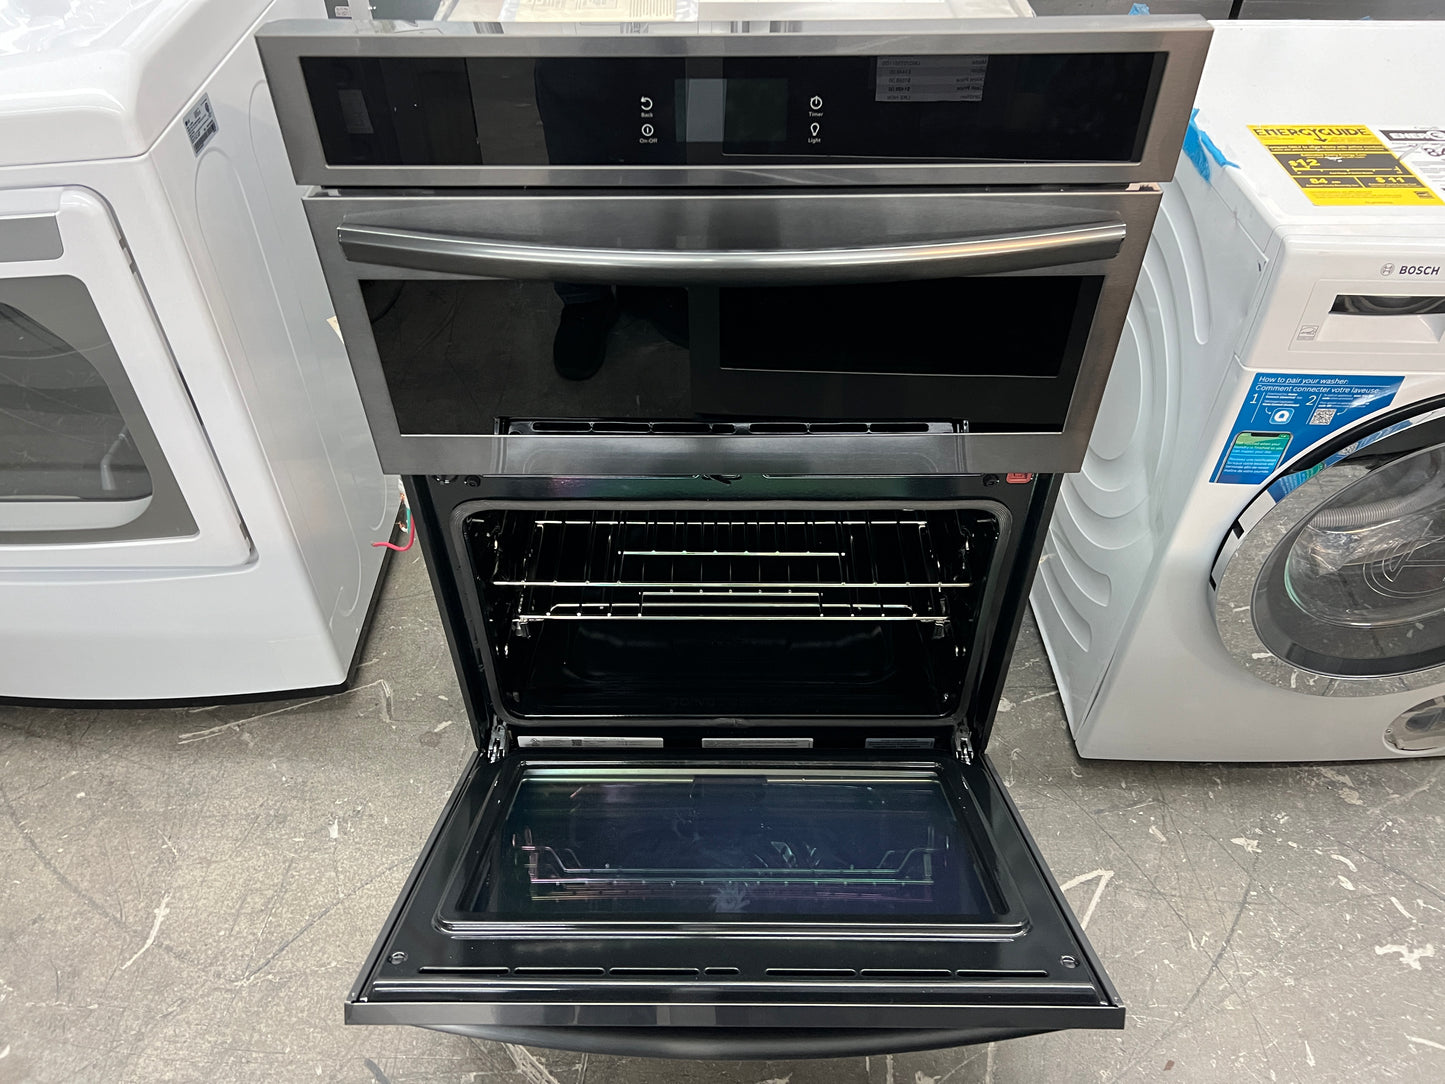 Frigidaire GCWM3067AD 30 Inch Combination Electric Wall Oven Air Fry, 7.0 Cu. Ft. , Convection Oven, Steam and Self Clean, Slow Cook, Steam Bake, Microwave Oven Combo, Black Stainless Steel New Open Box 369433